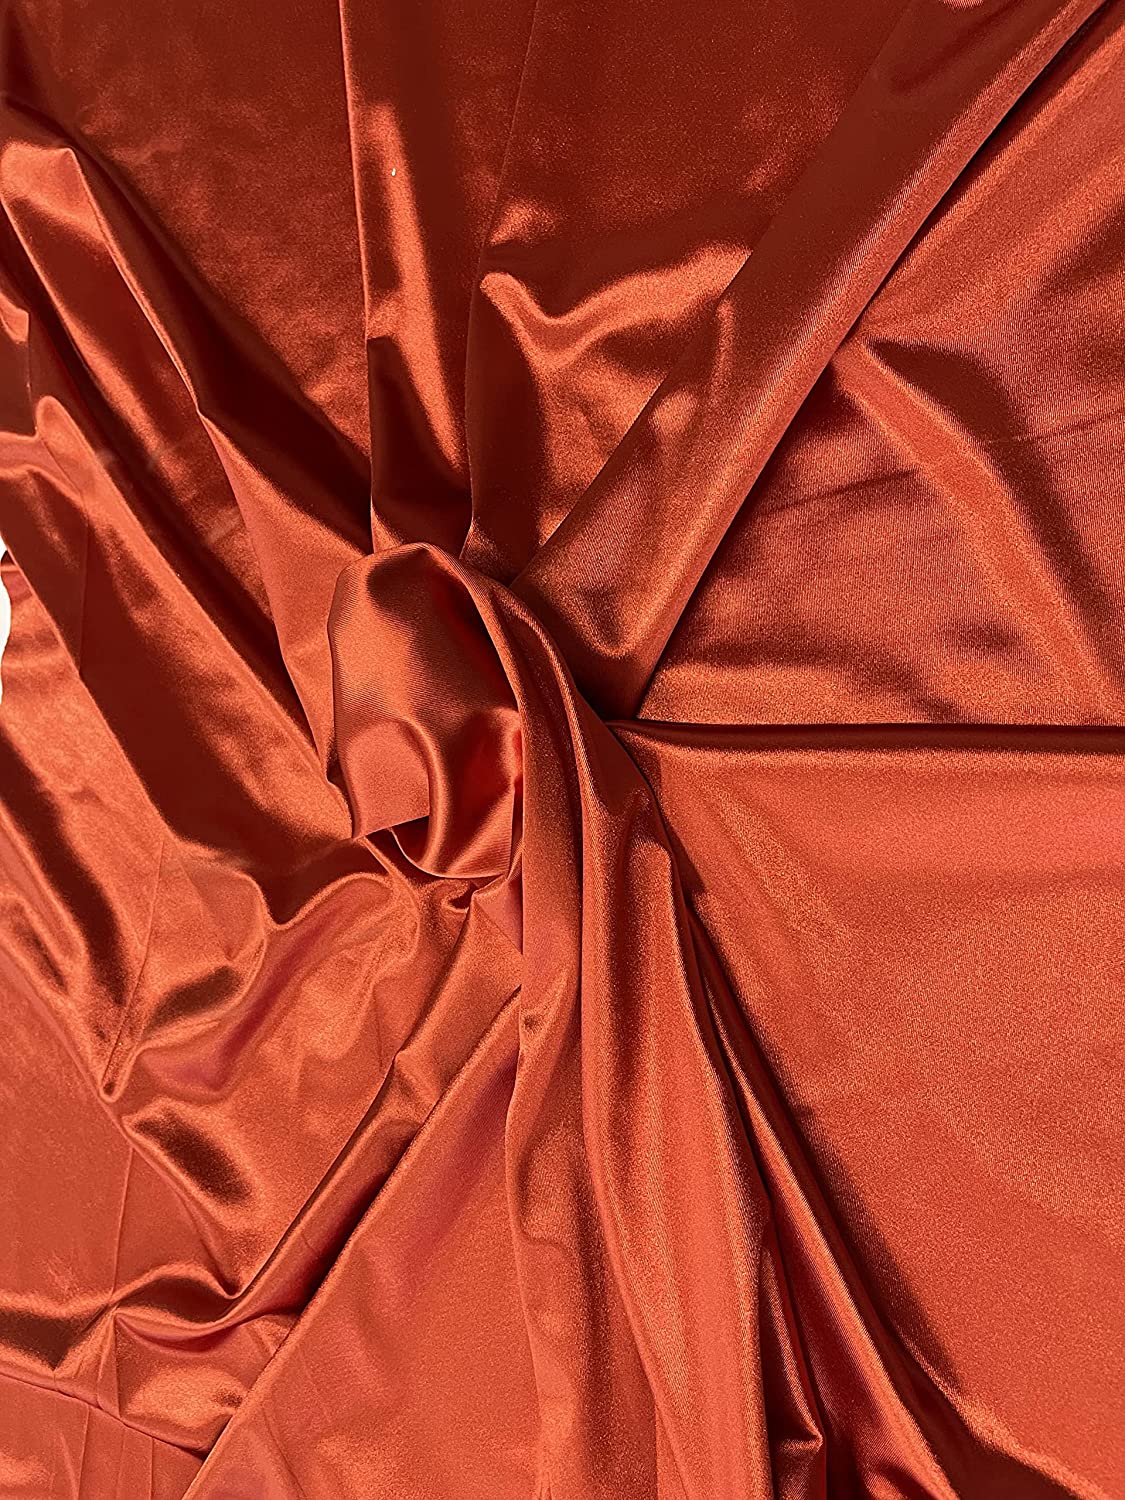 Deluxe Shiny Polyester Spandex Stretch Fabric (1 Yard, Rust)